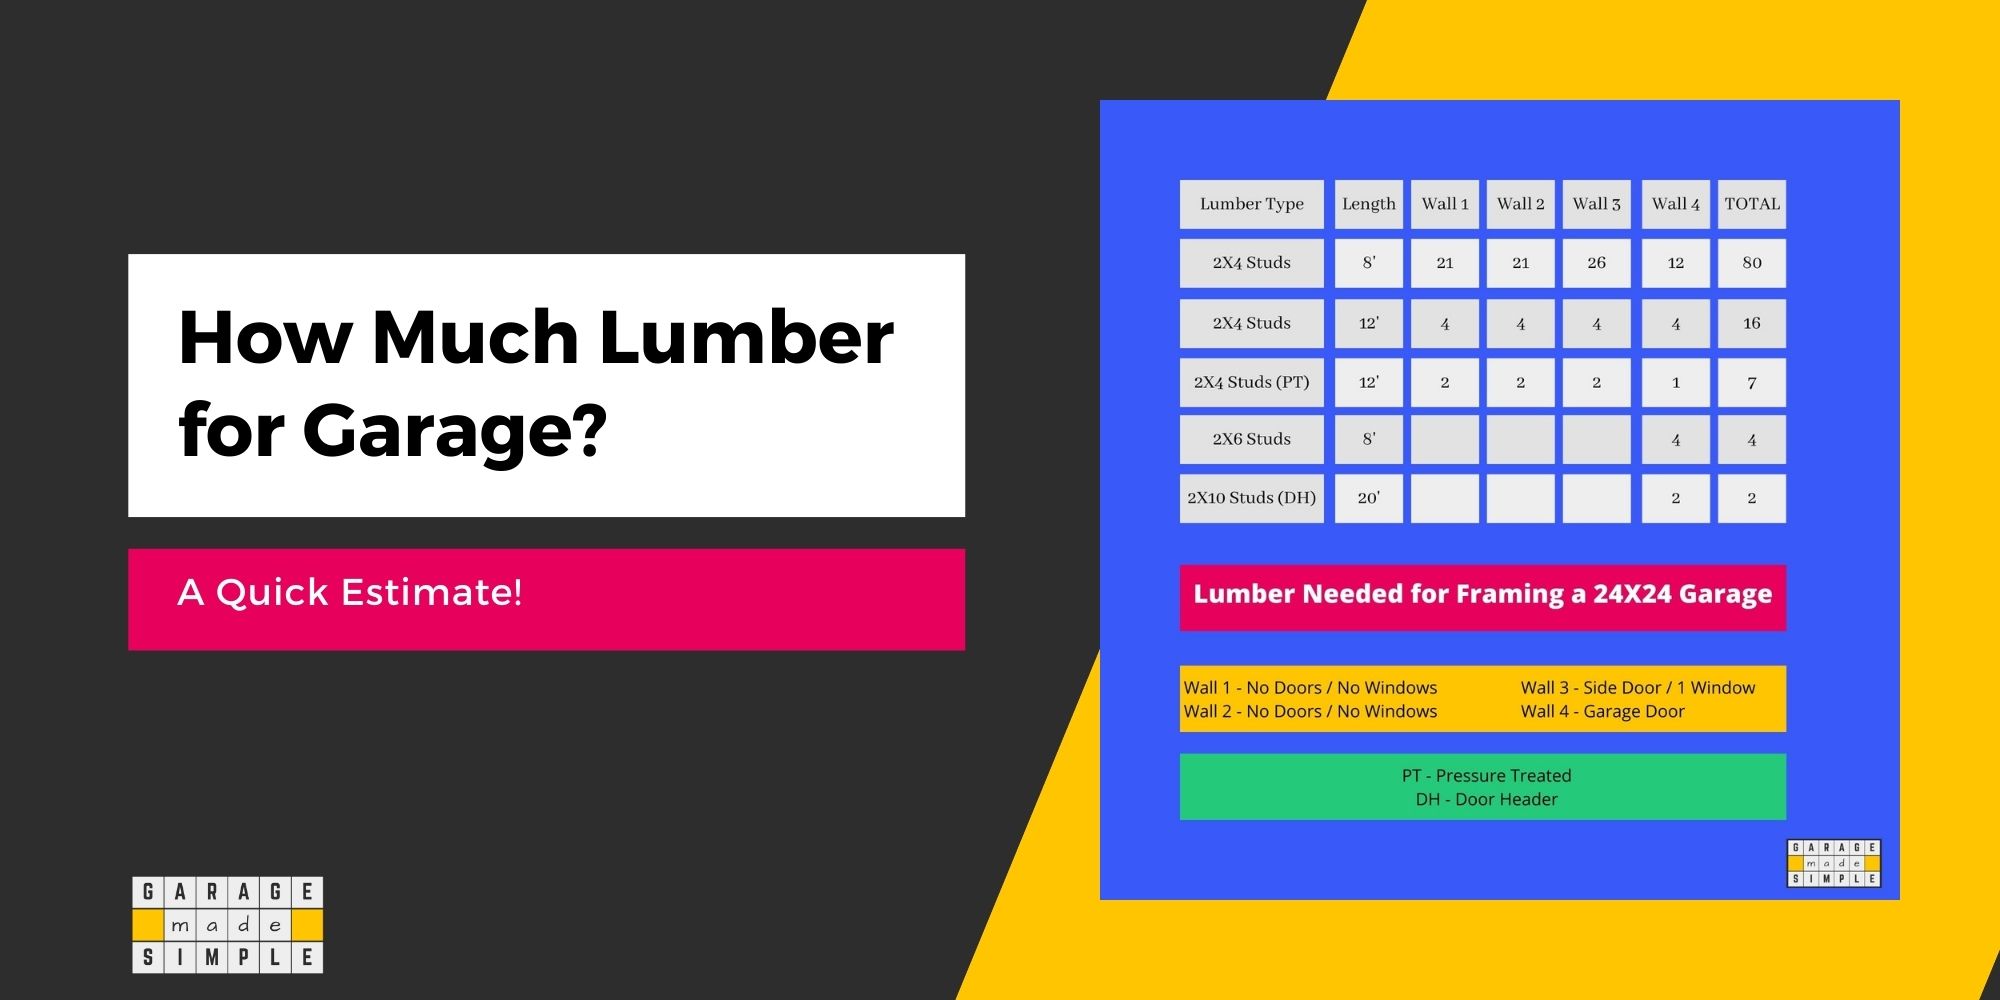 How Much Lumber Do You Need To Frame Your New Garage?